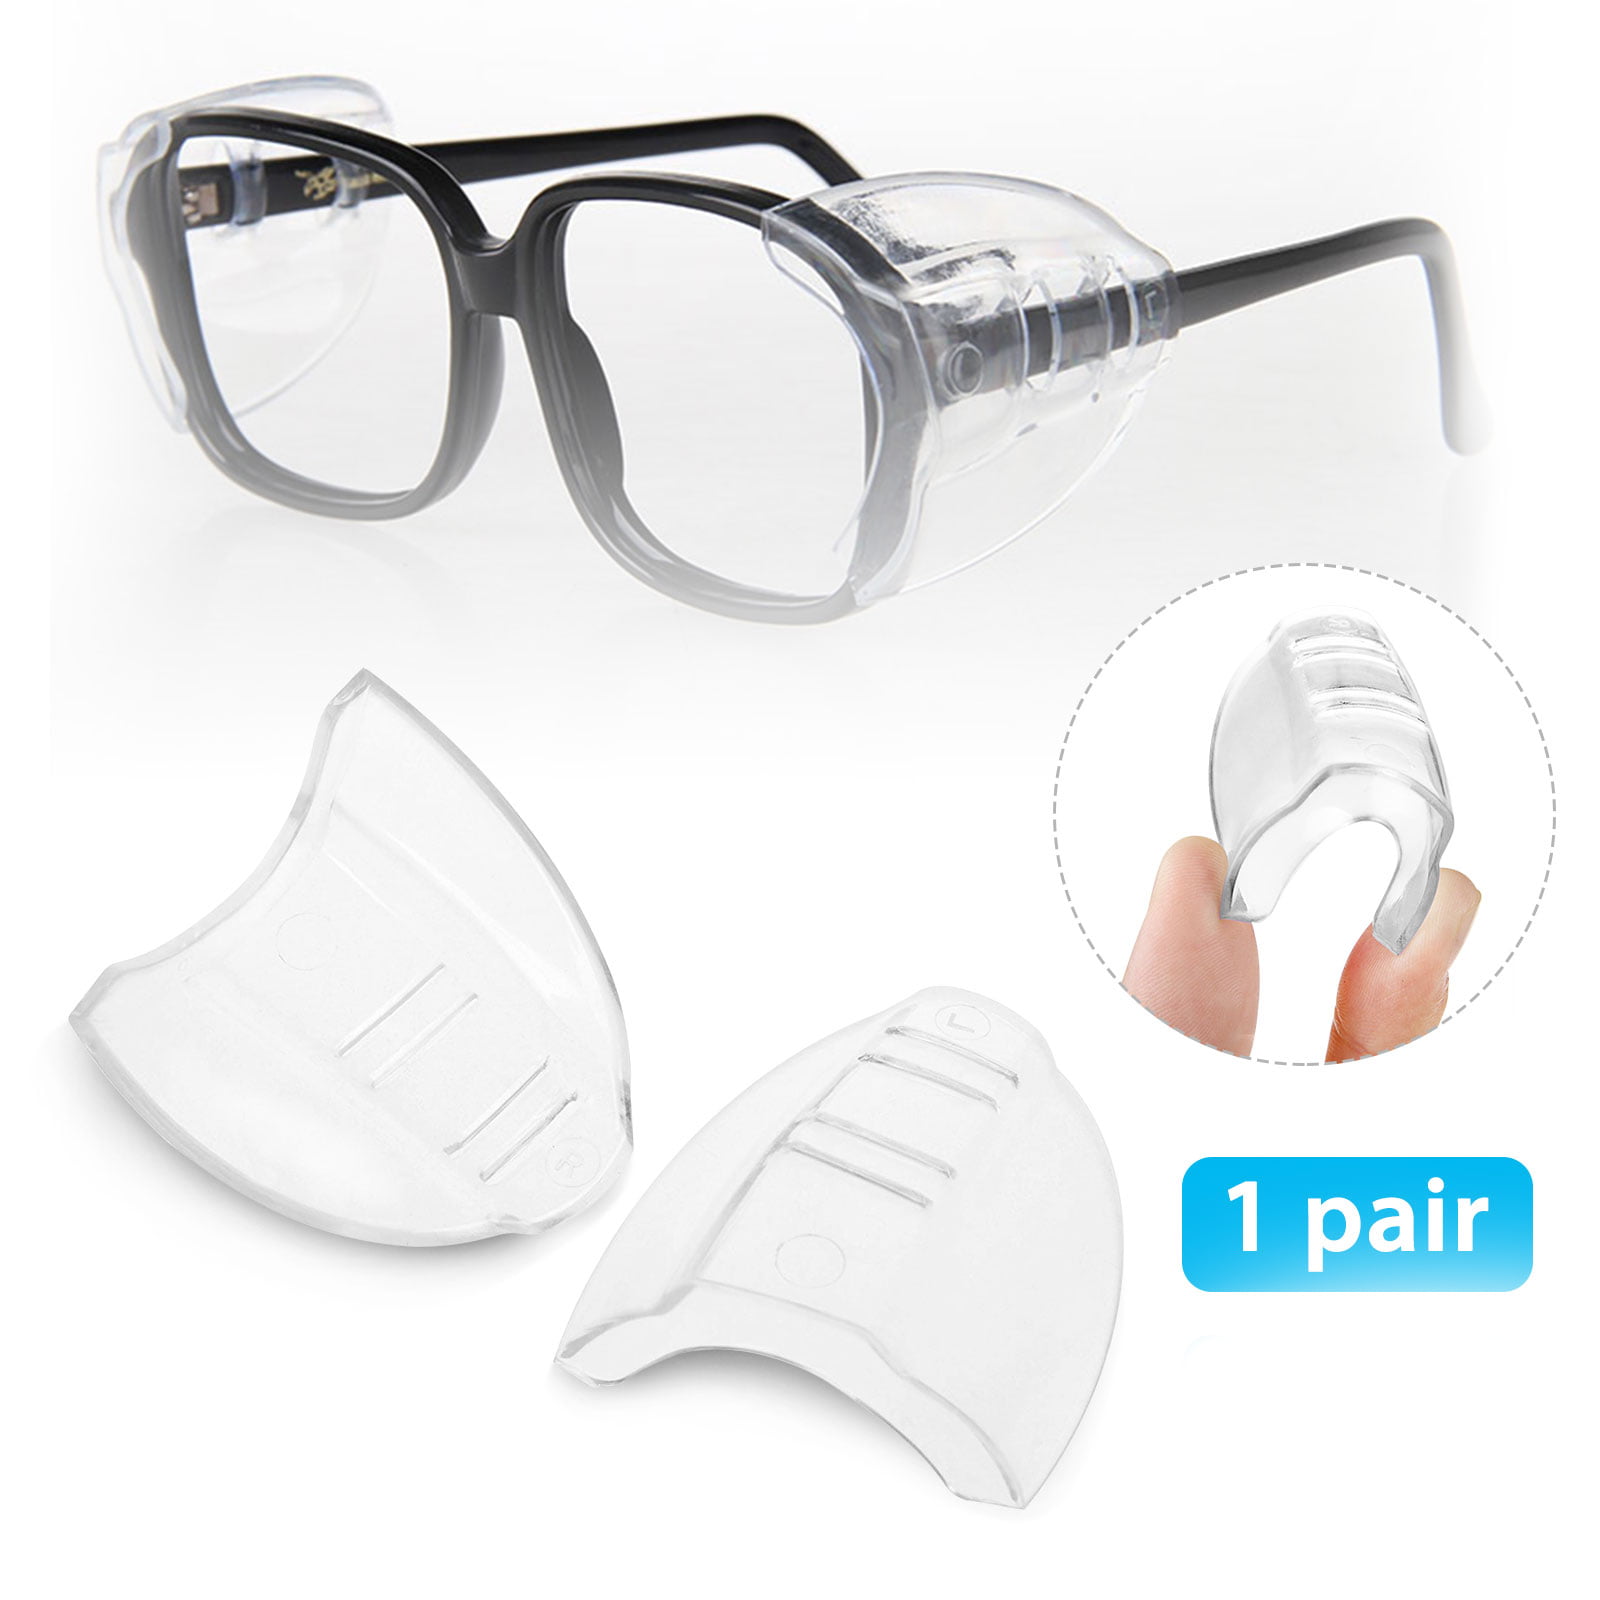 One Pair Slip On Clear Side Shields For Safety Glasses Safety Glasses 